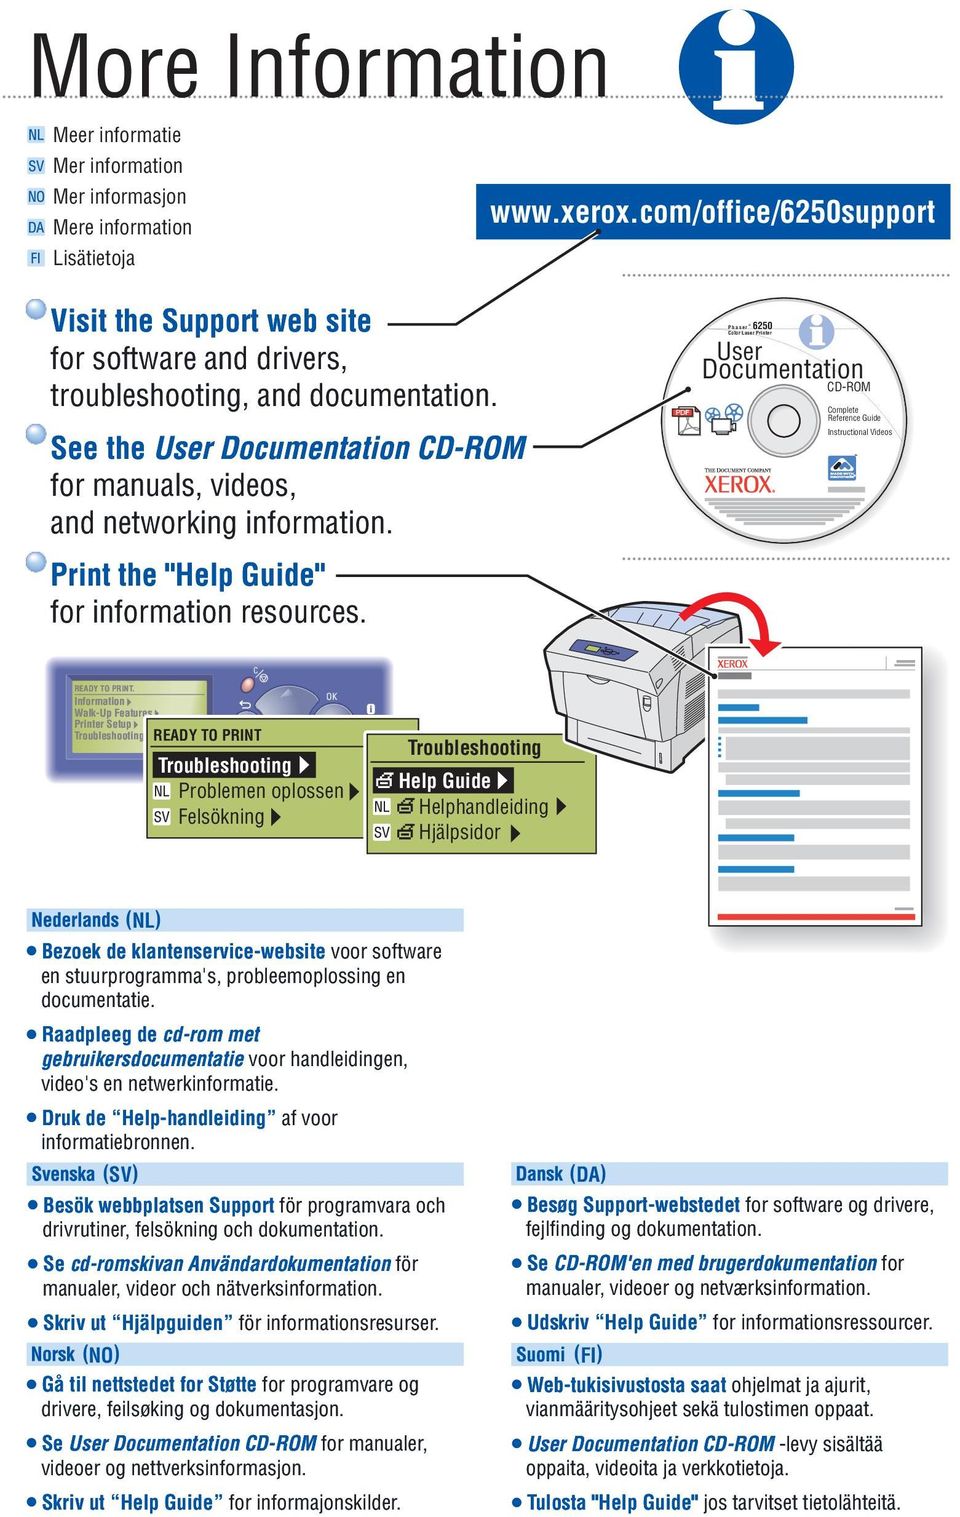 Phaser 6250 Color Laser Printer User Documentation CD-ROM Complete Reference Guide Instructional Videos READY TO PRINT.